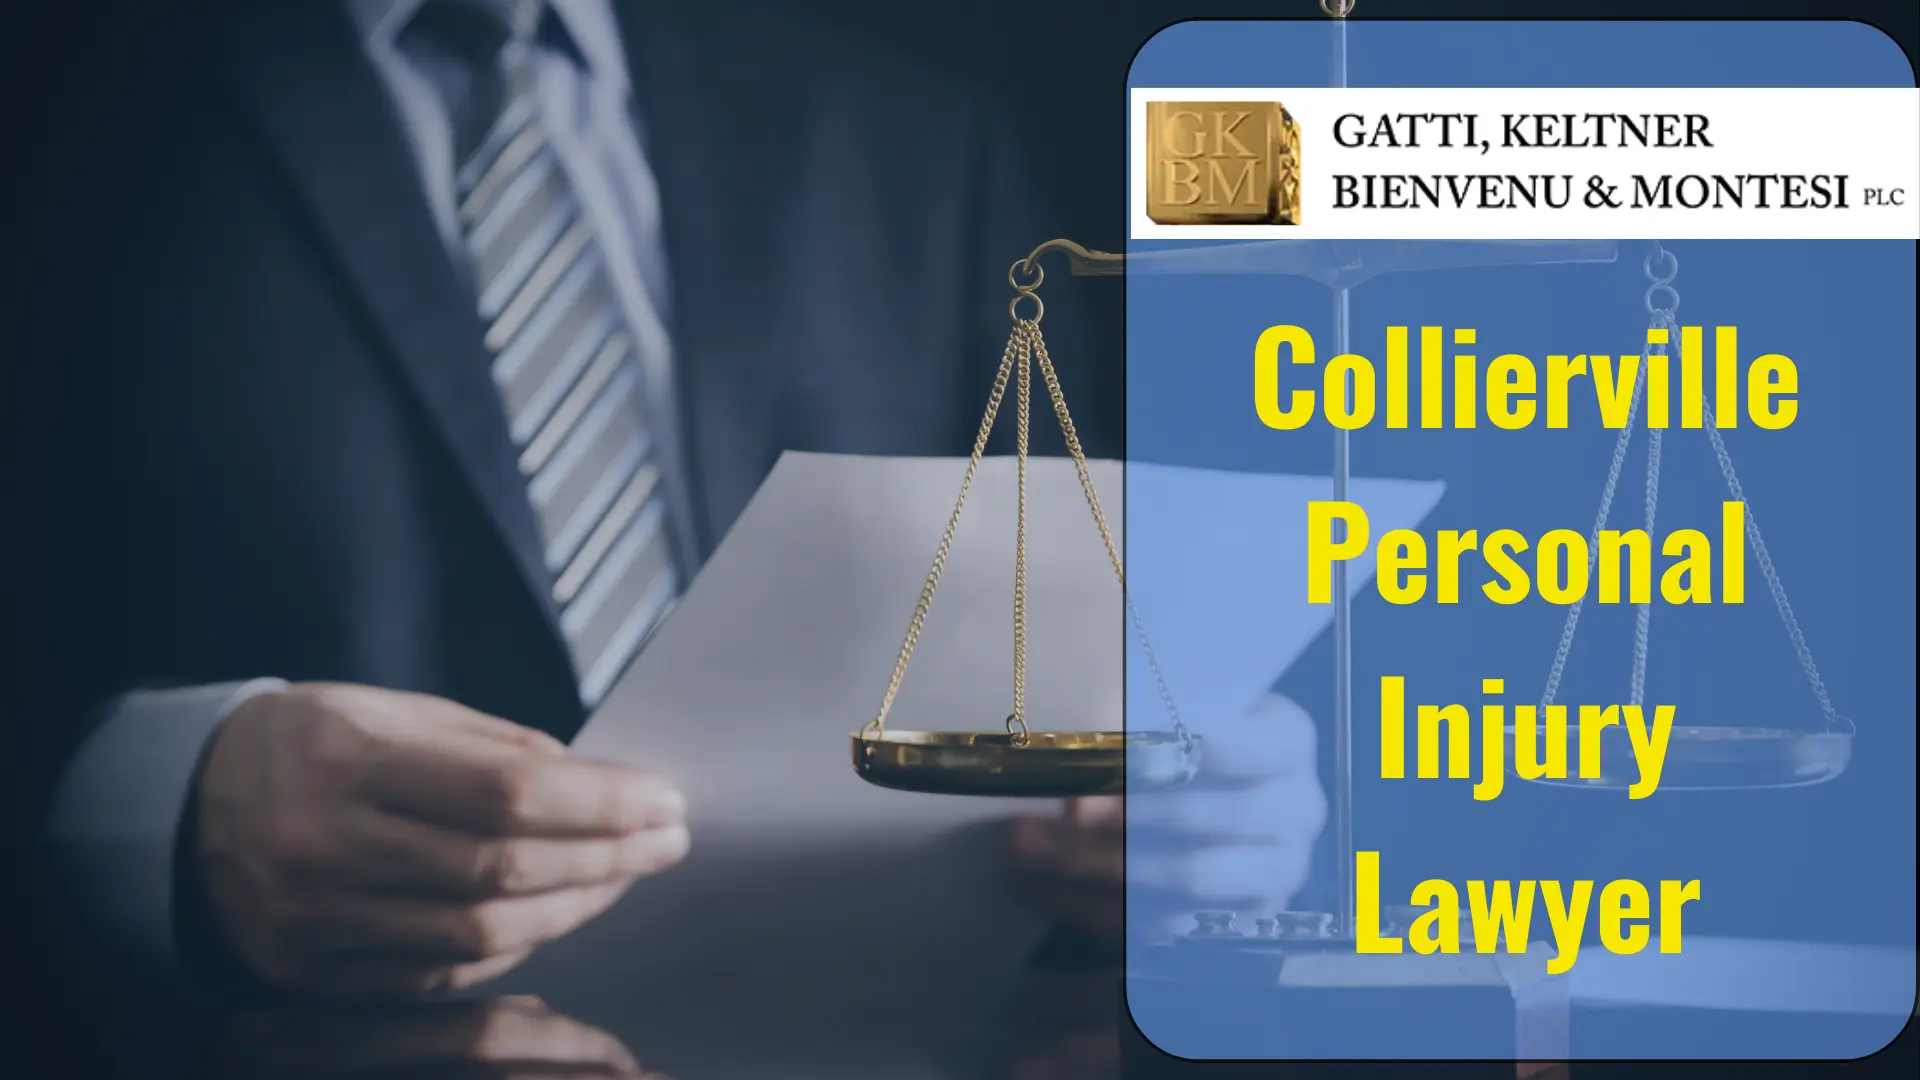 Collierville Personal Injury Lawyer